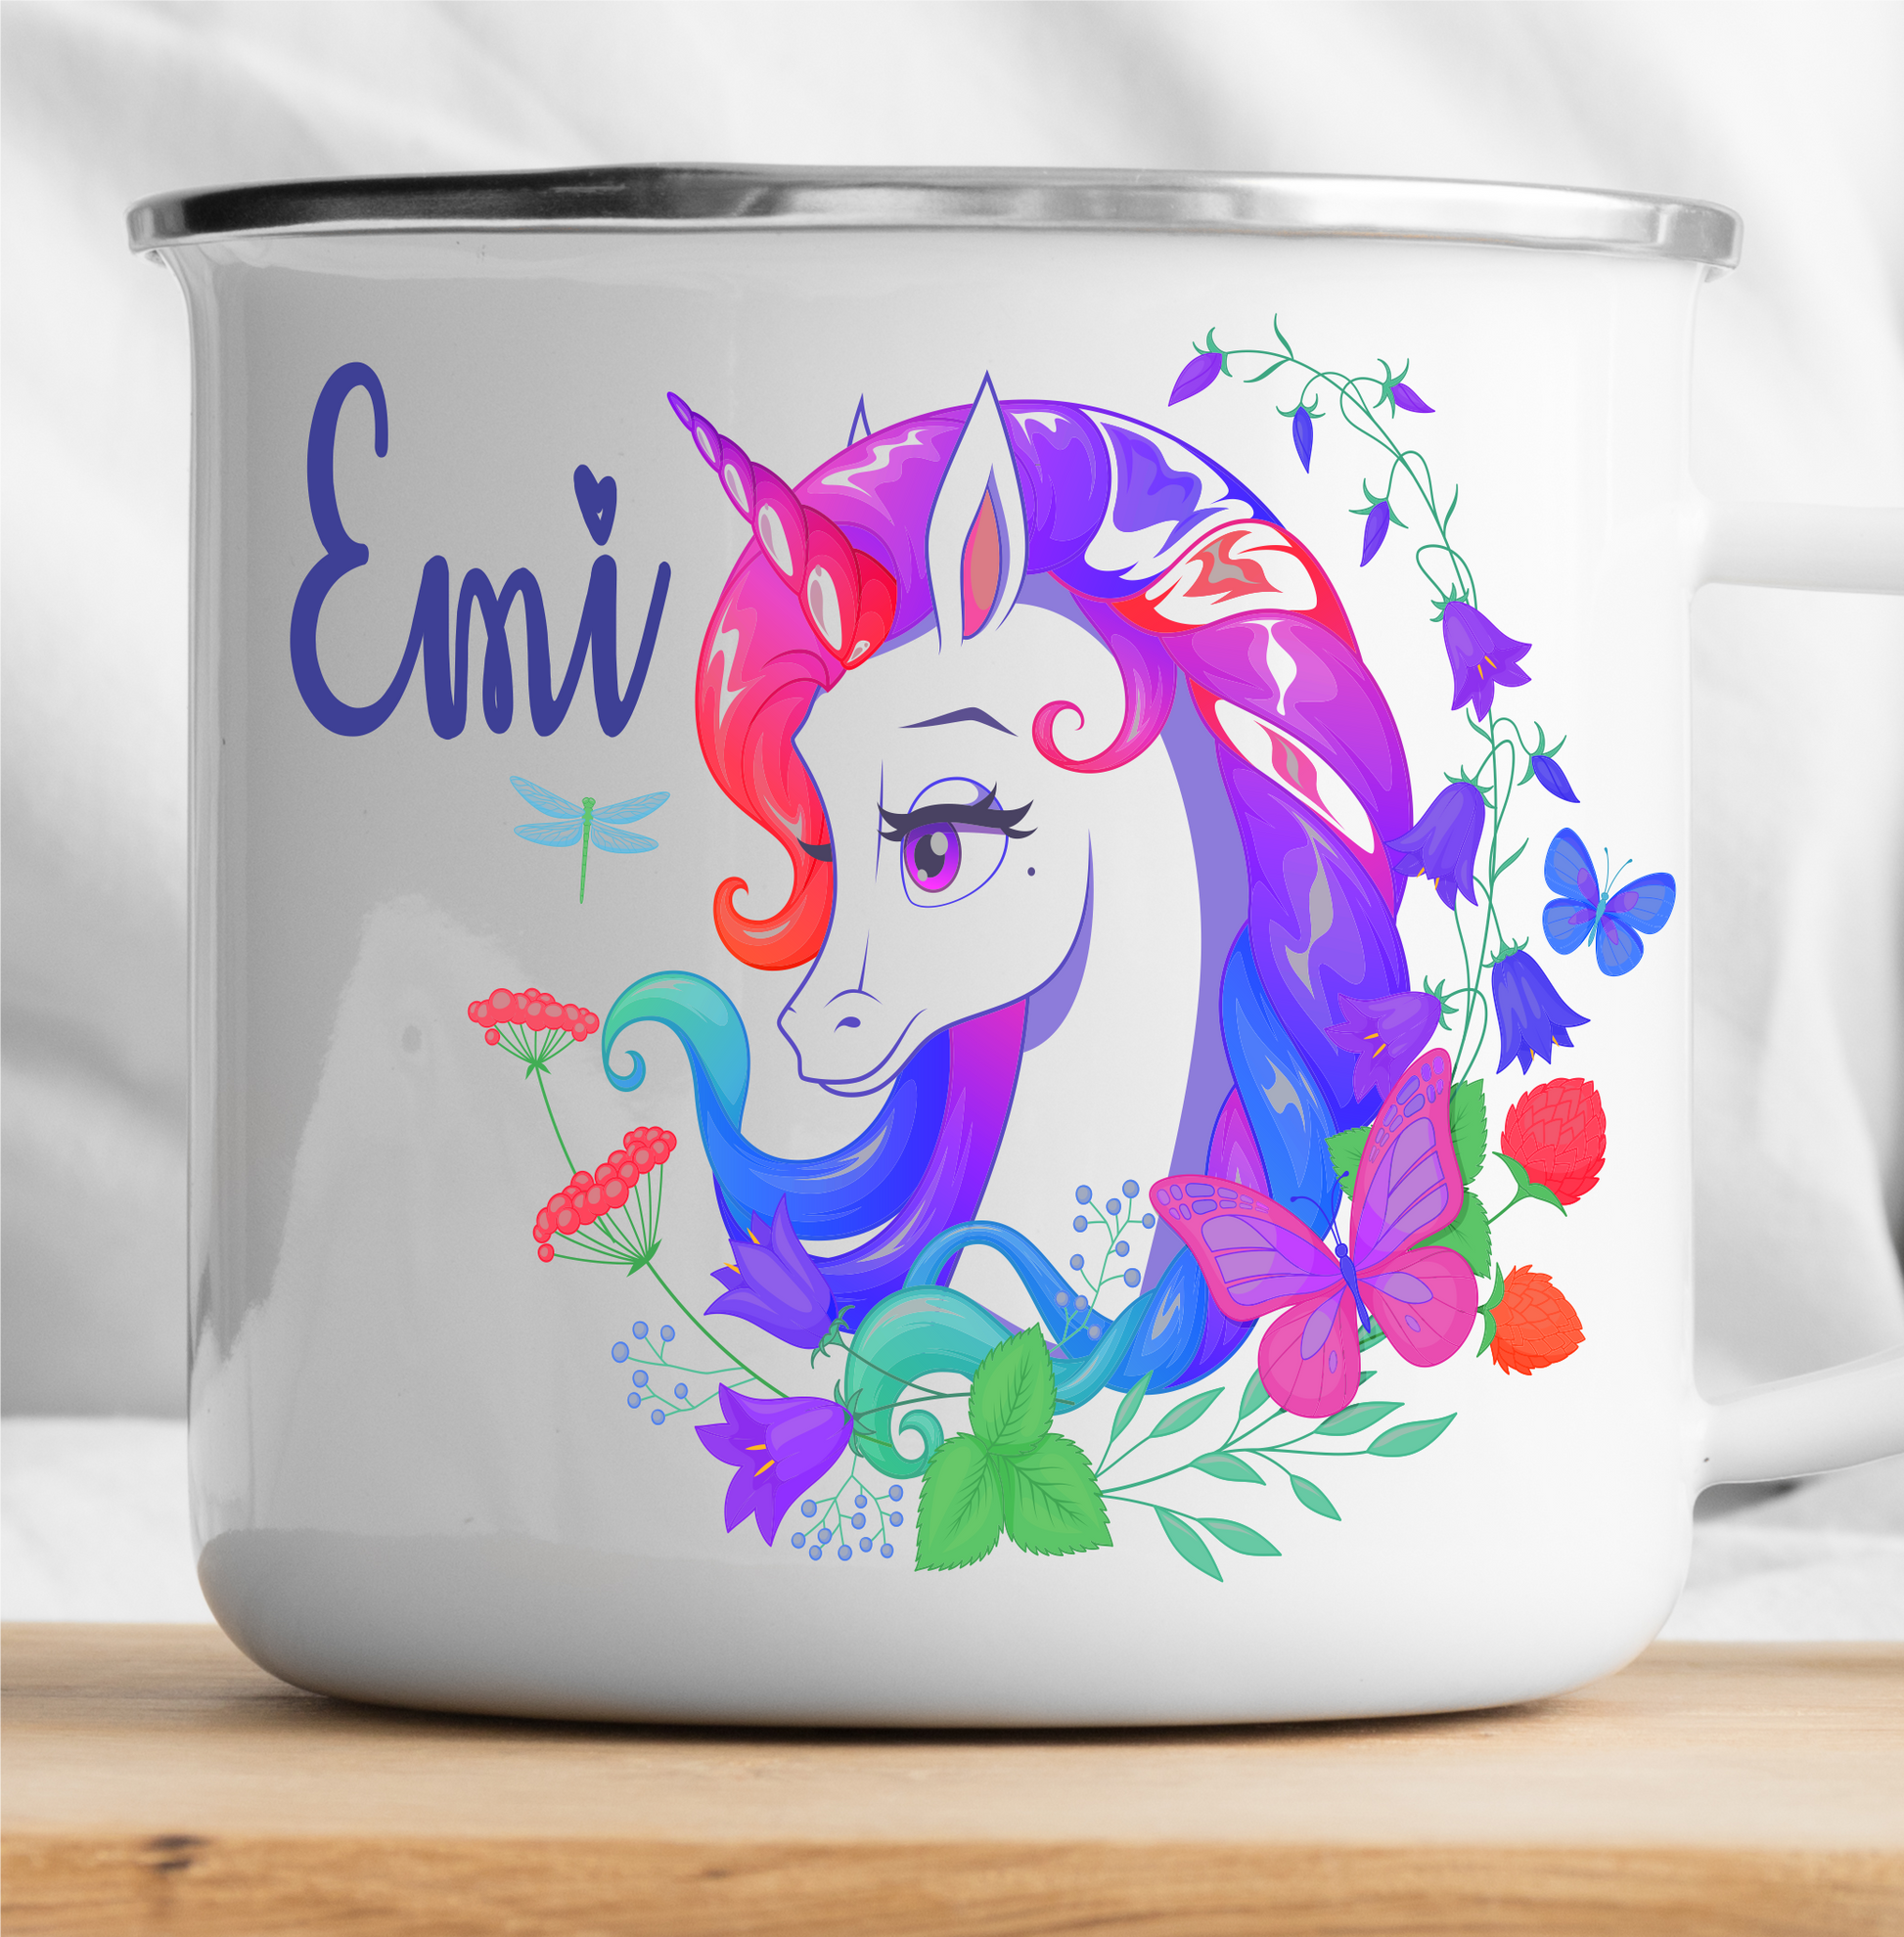 Get trendy with Personalized Unicorn 8 Mug -  available at cutegifts.eu. Grab yours for $15.90 today!